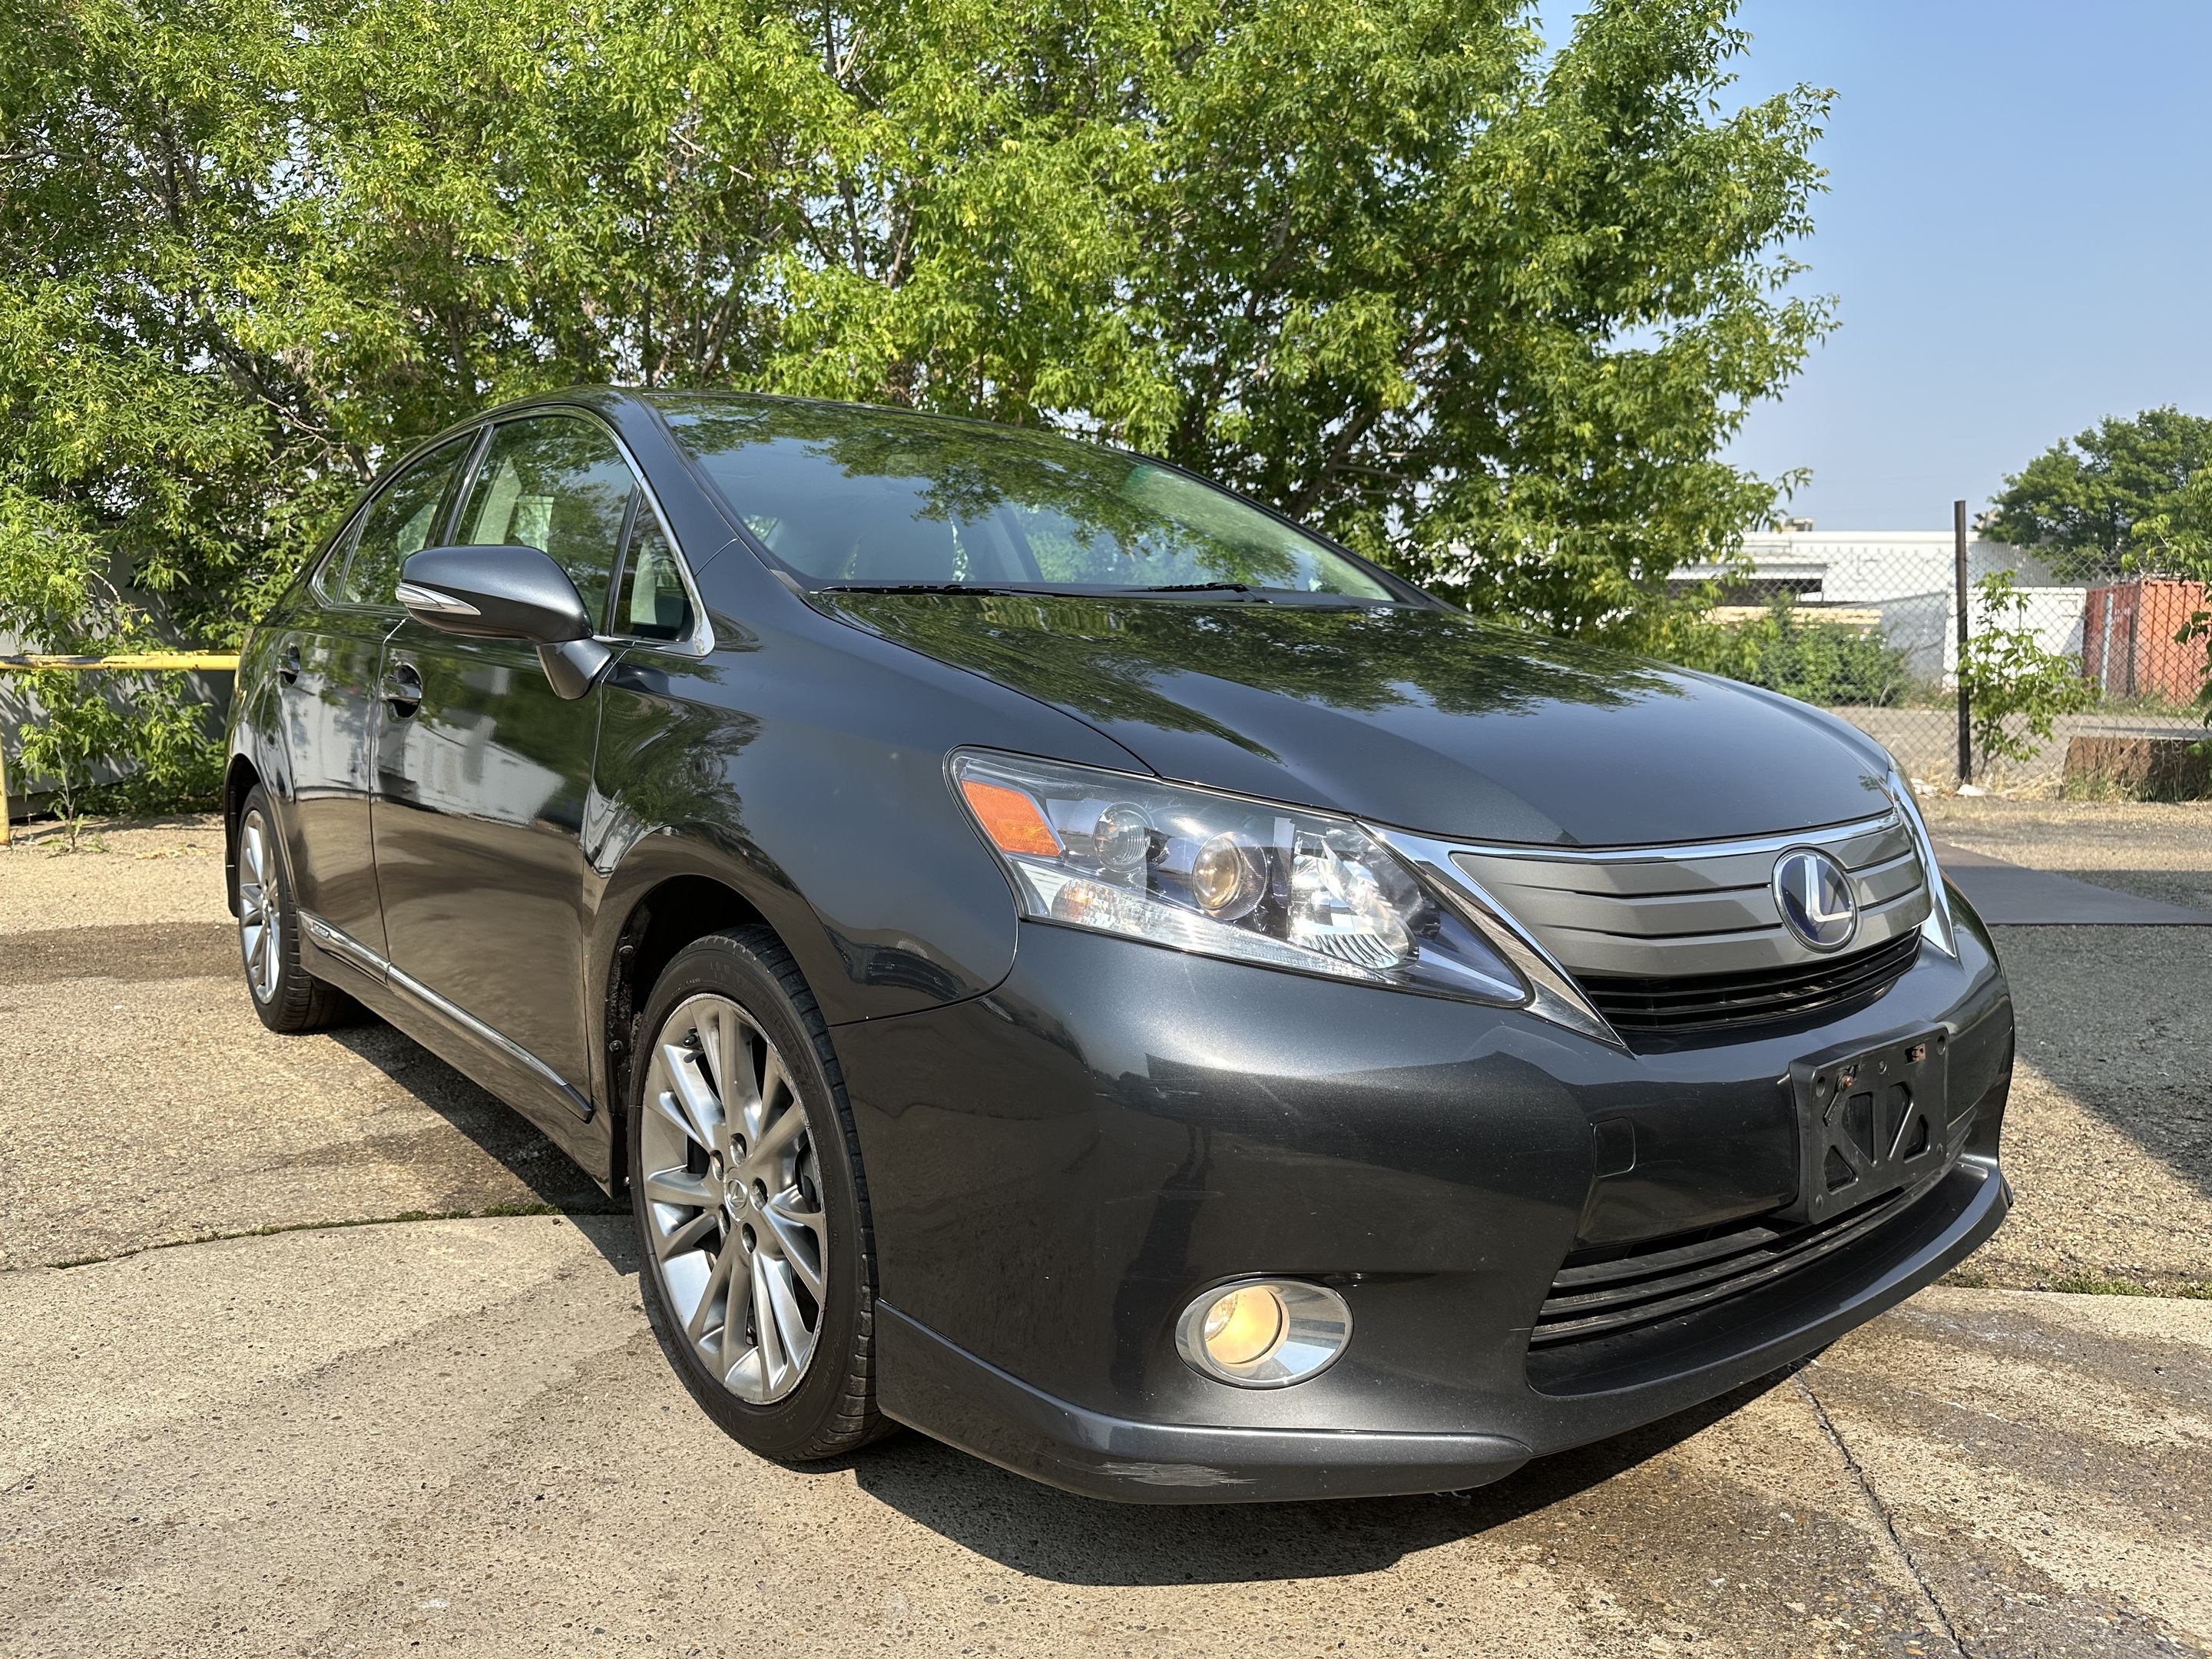 2010 Lexus HS 250h New Brakes, Full Inspection, Leather Seats, Carfax